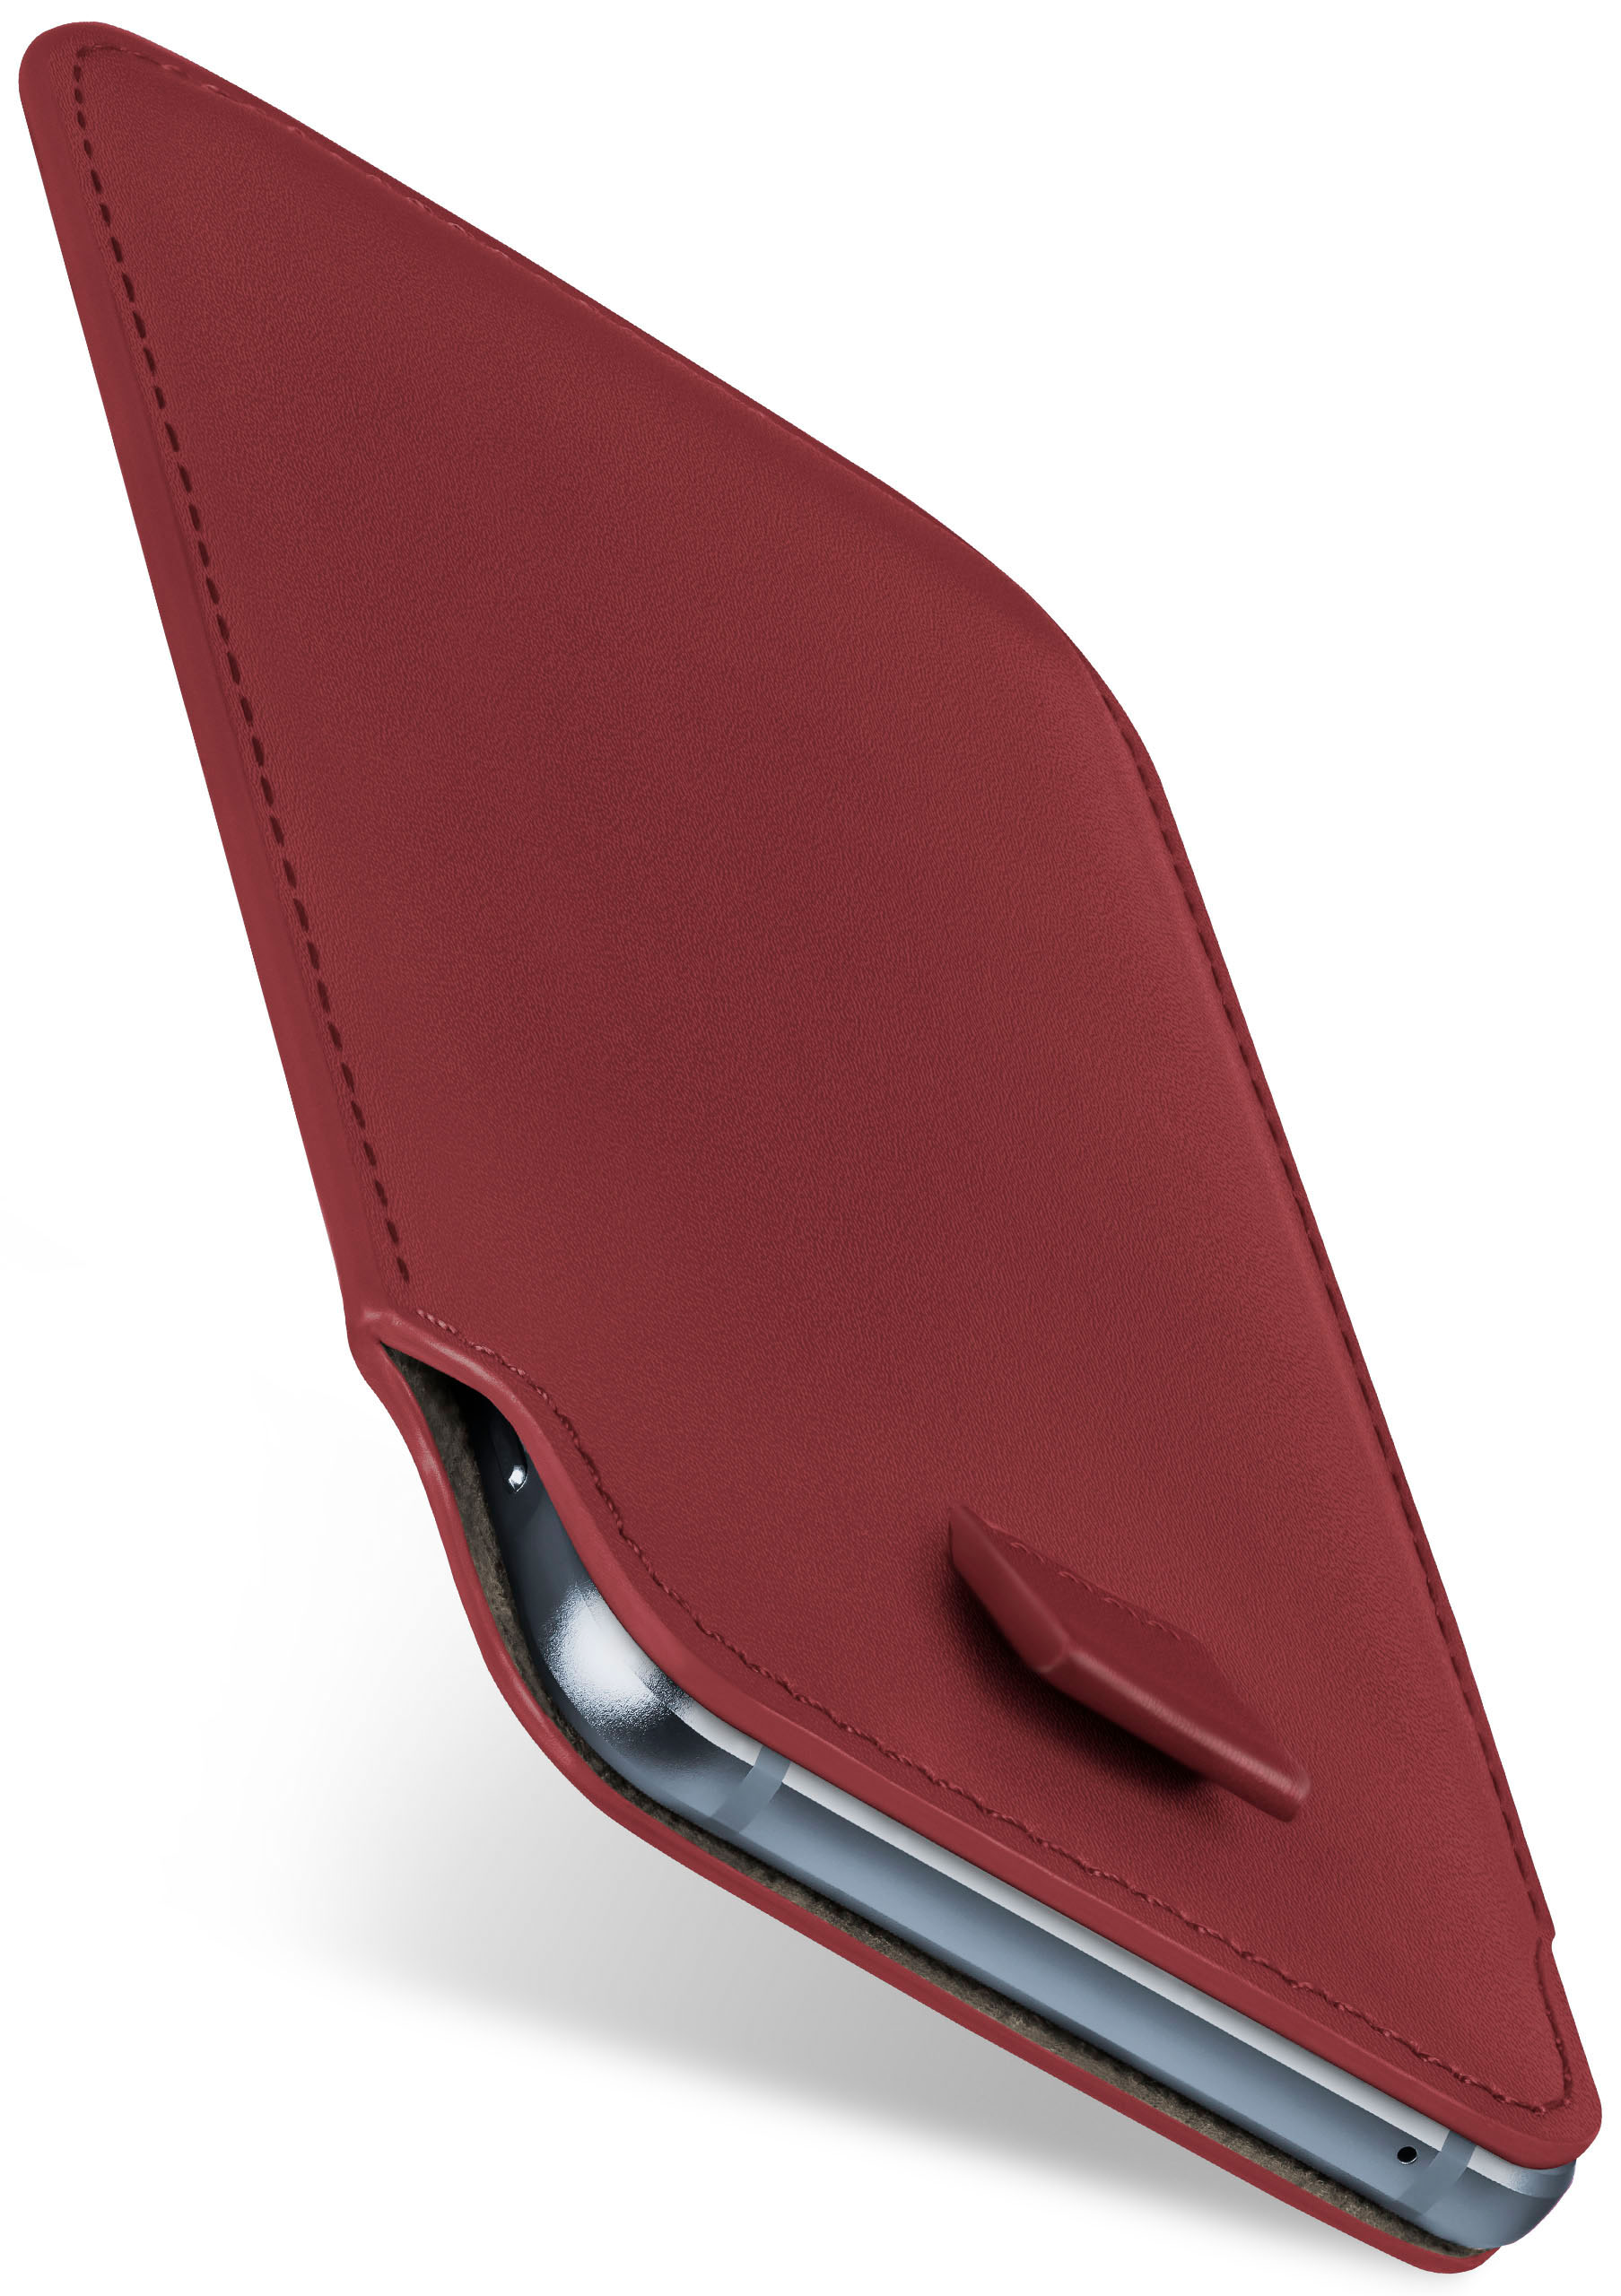 MOEX One Cover, Full M7, Maroon-Red Case, Slide HTC,